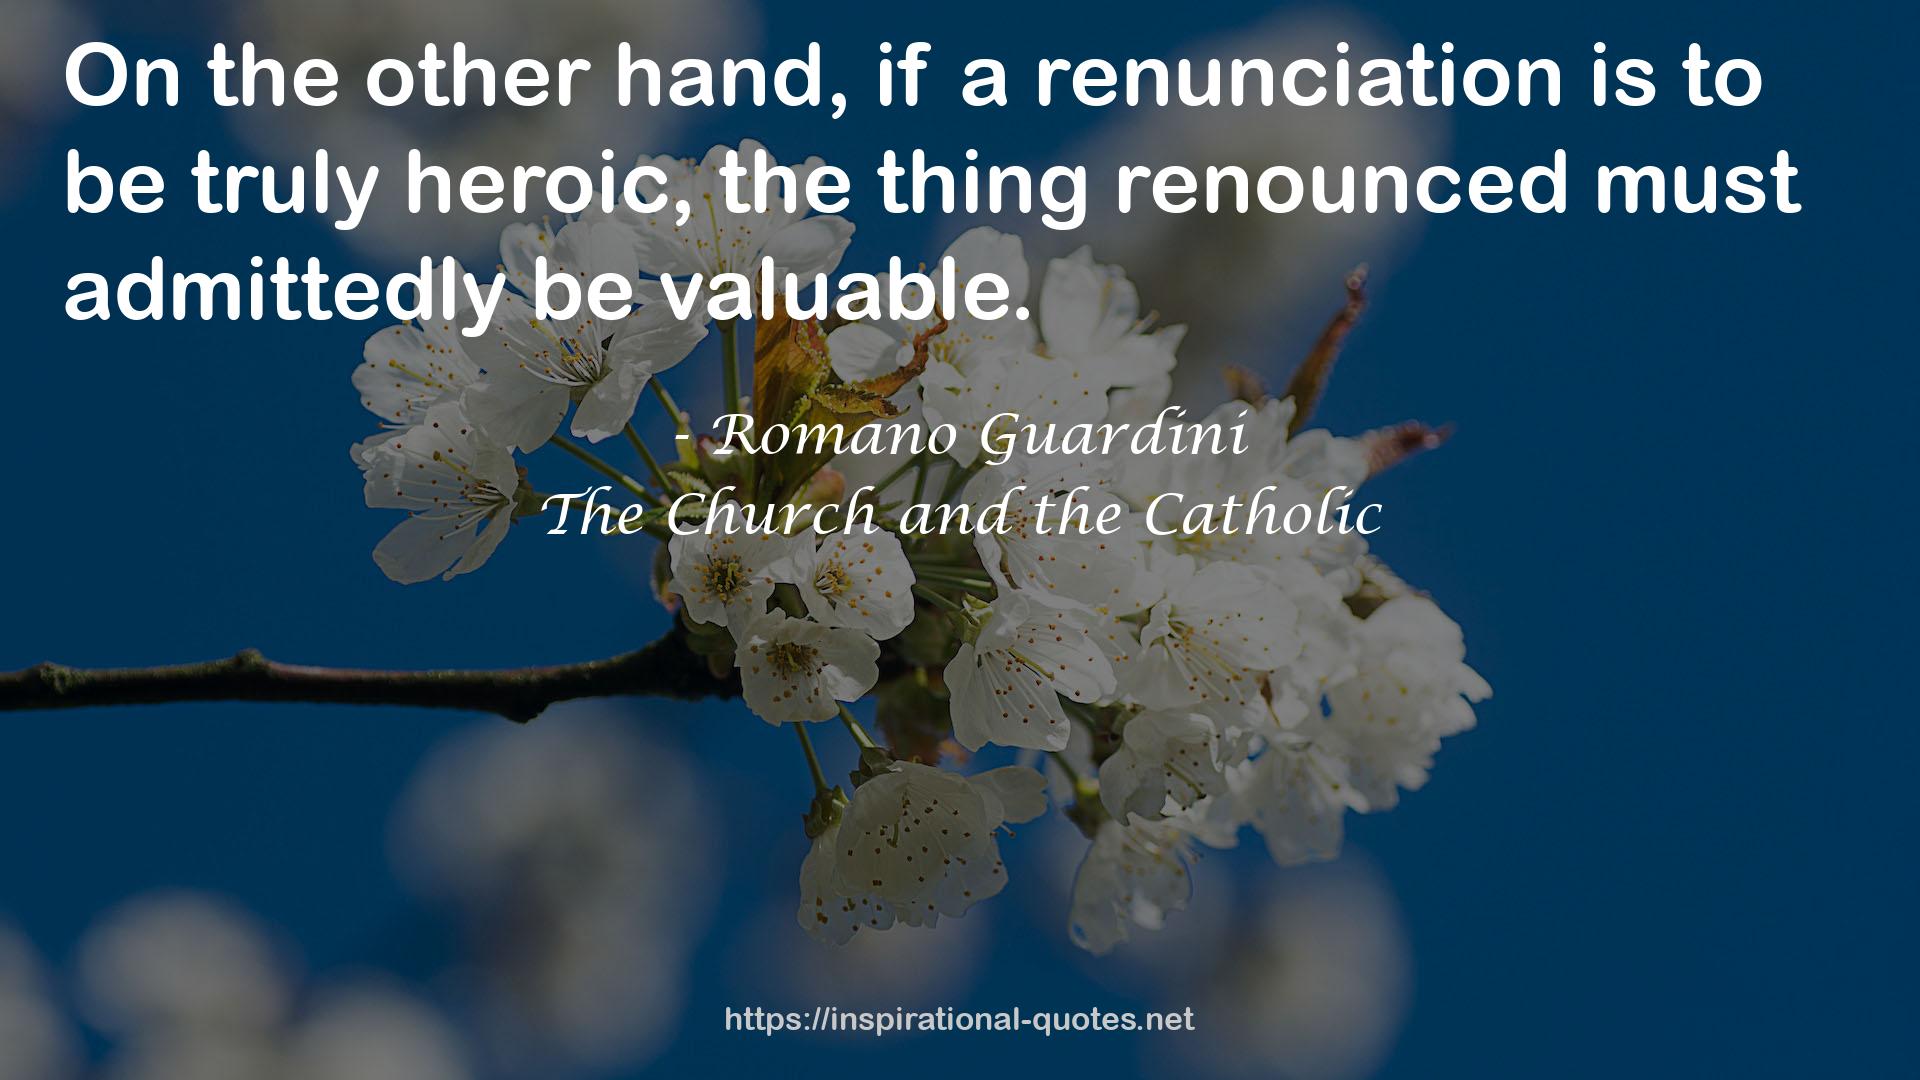 The Church and the Catholic QUOTES